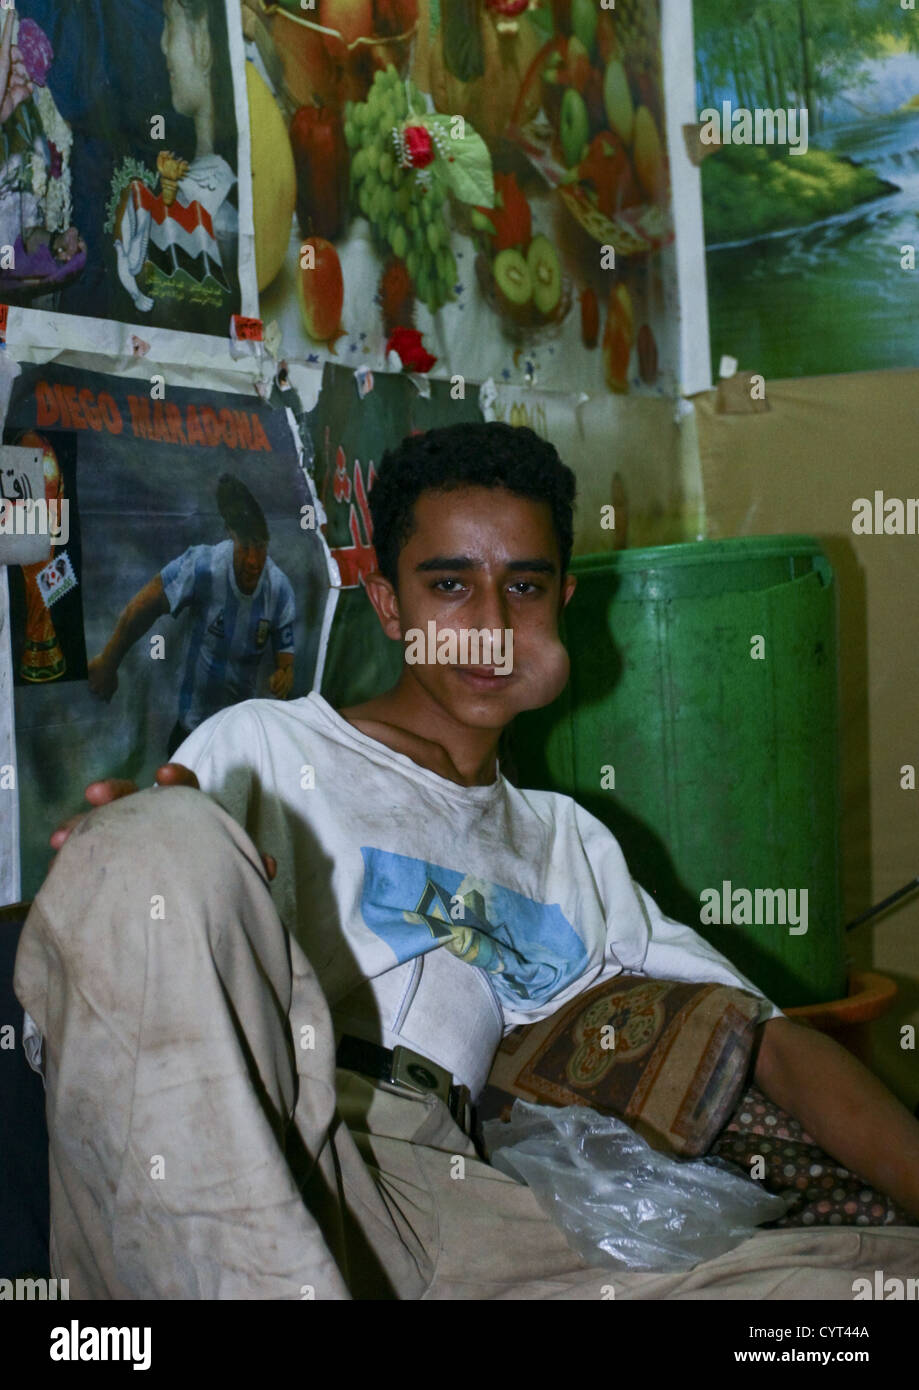 Young Man Lying Down And Chewing Qat In A Room Full Of Posters, Sanaa, Yemen Stock Photo